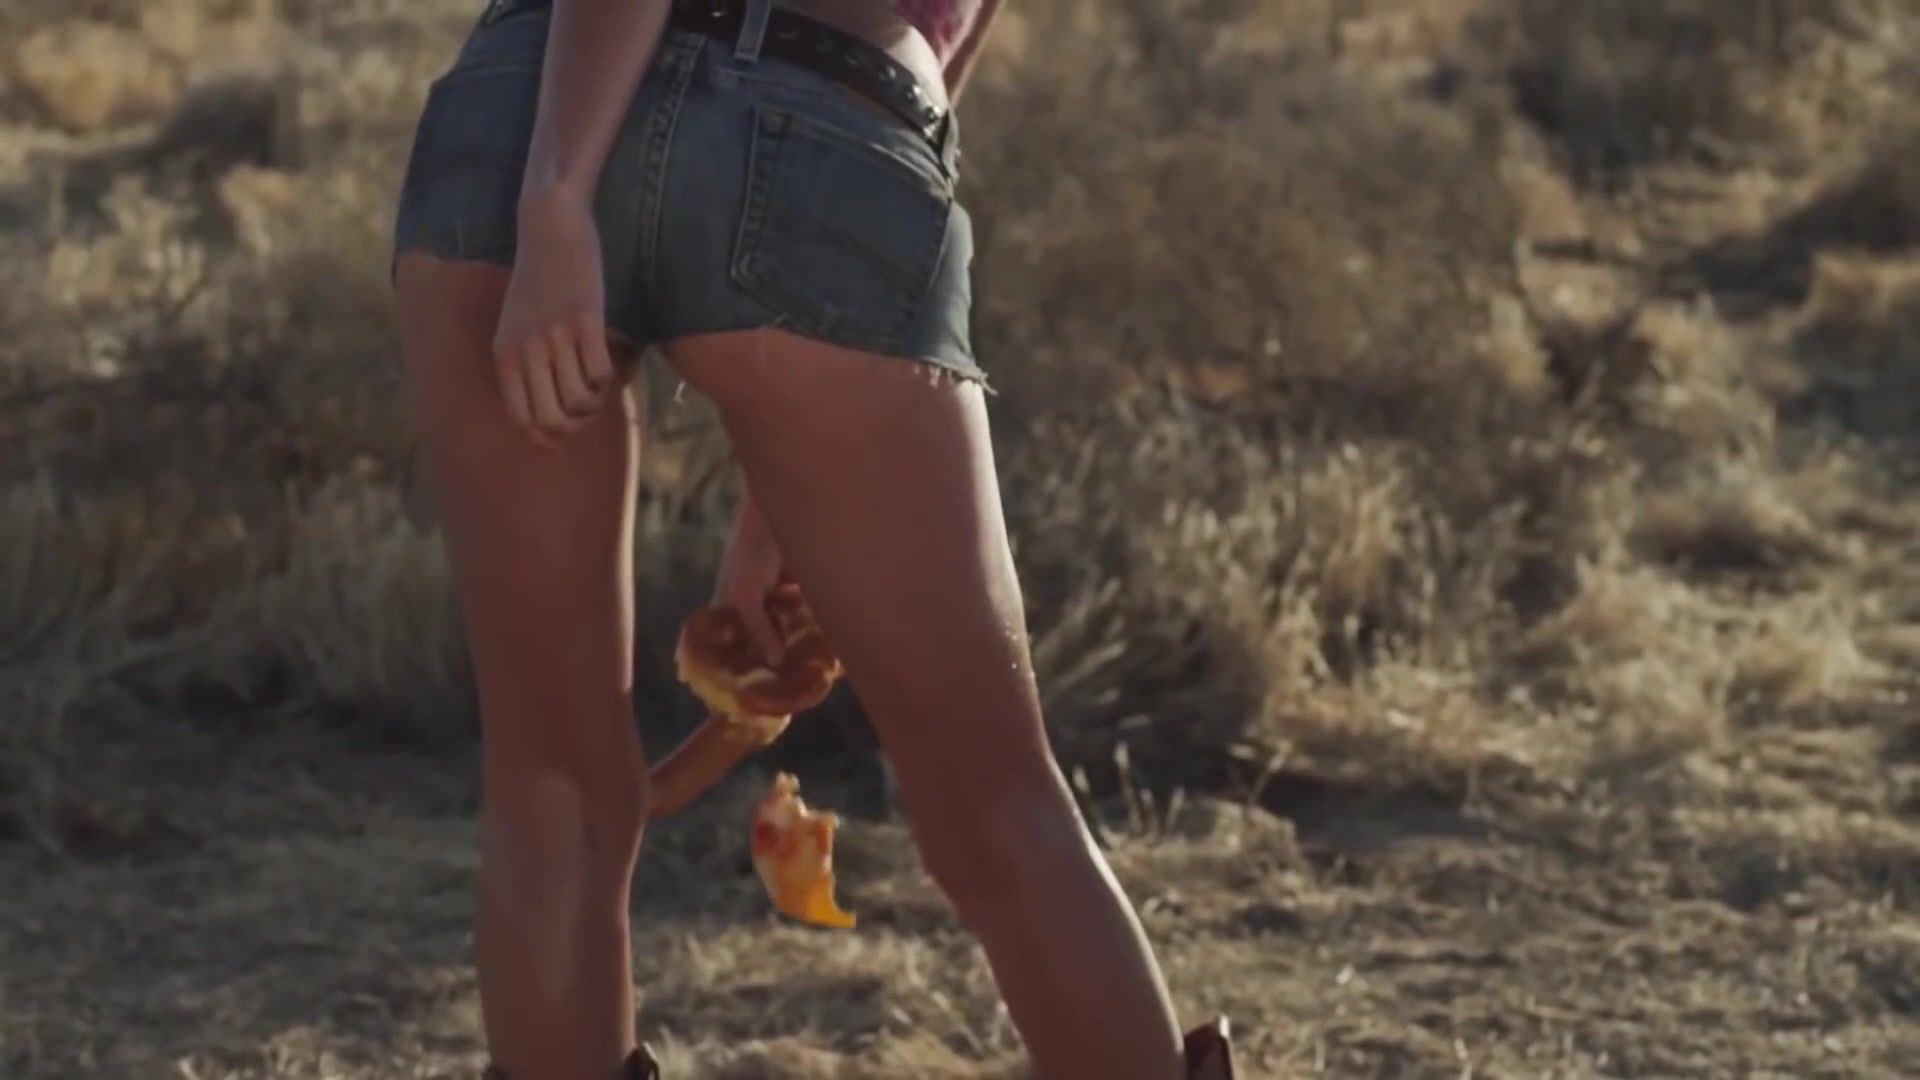 POV Sexiest Girls of Fast food Commercials - Charlotte McKinney Kate Upton Emily Rat. Tera Patrick - 2